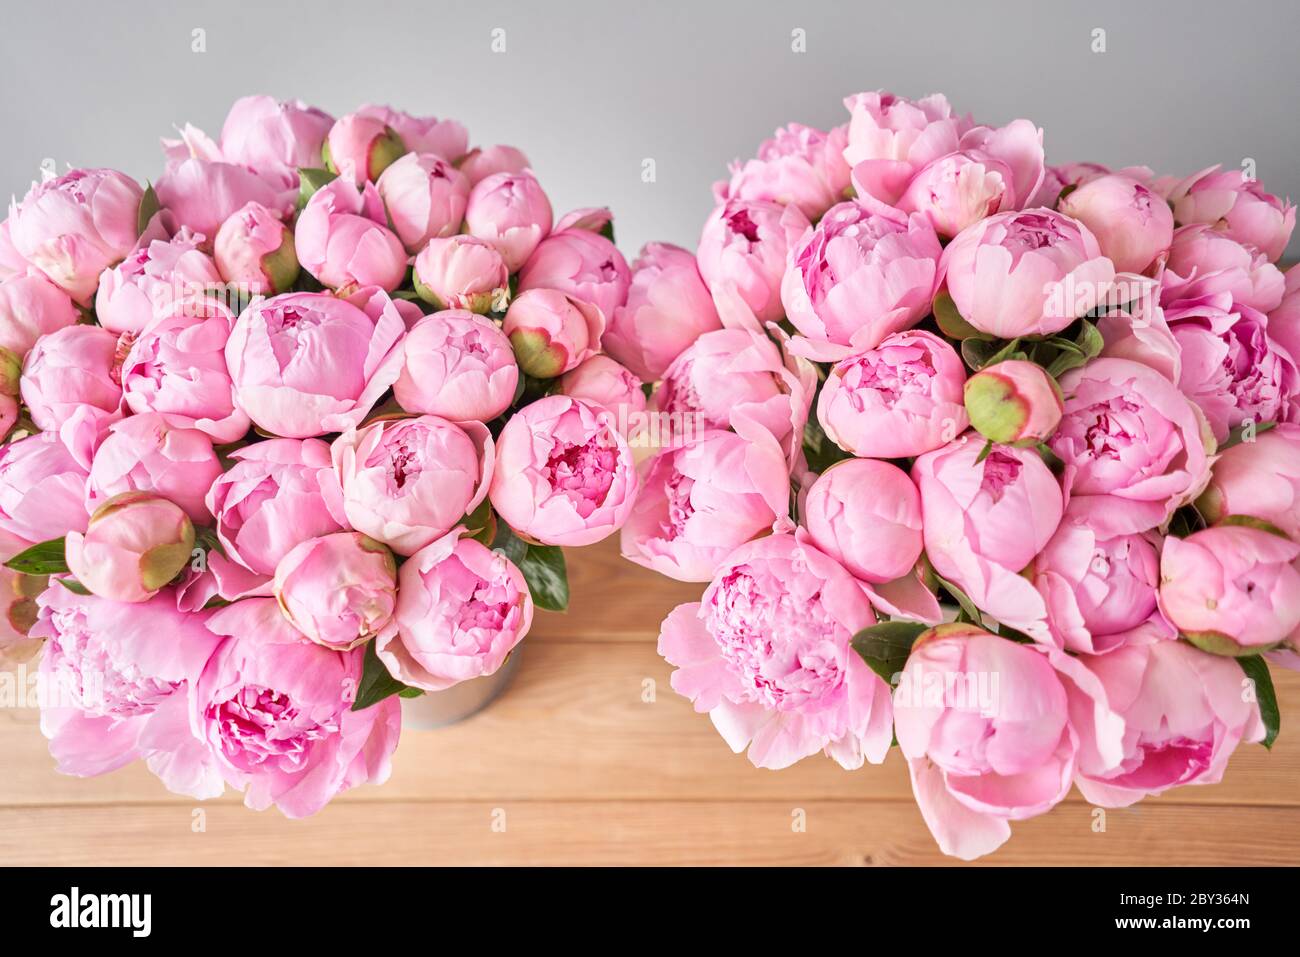 Two vases with peonies for Flowers delivery. Pink Angel Cheeks peonies in a metal vase. Beautiful peony flower for catalog or online store. Floral Stock Photo